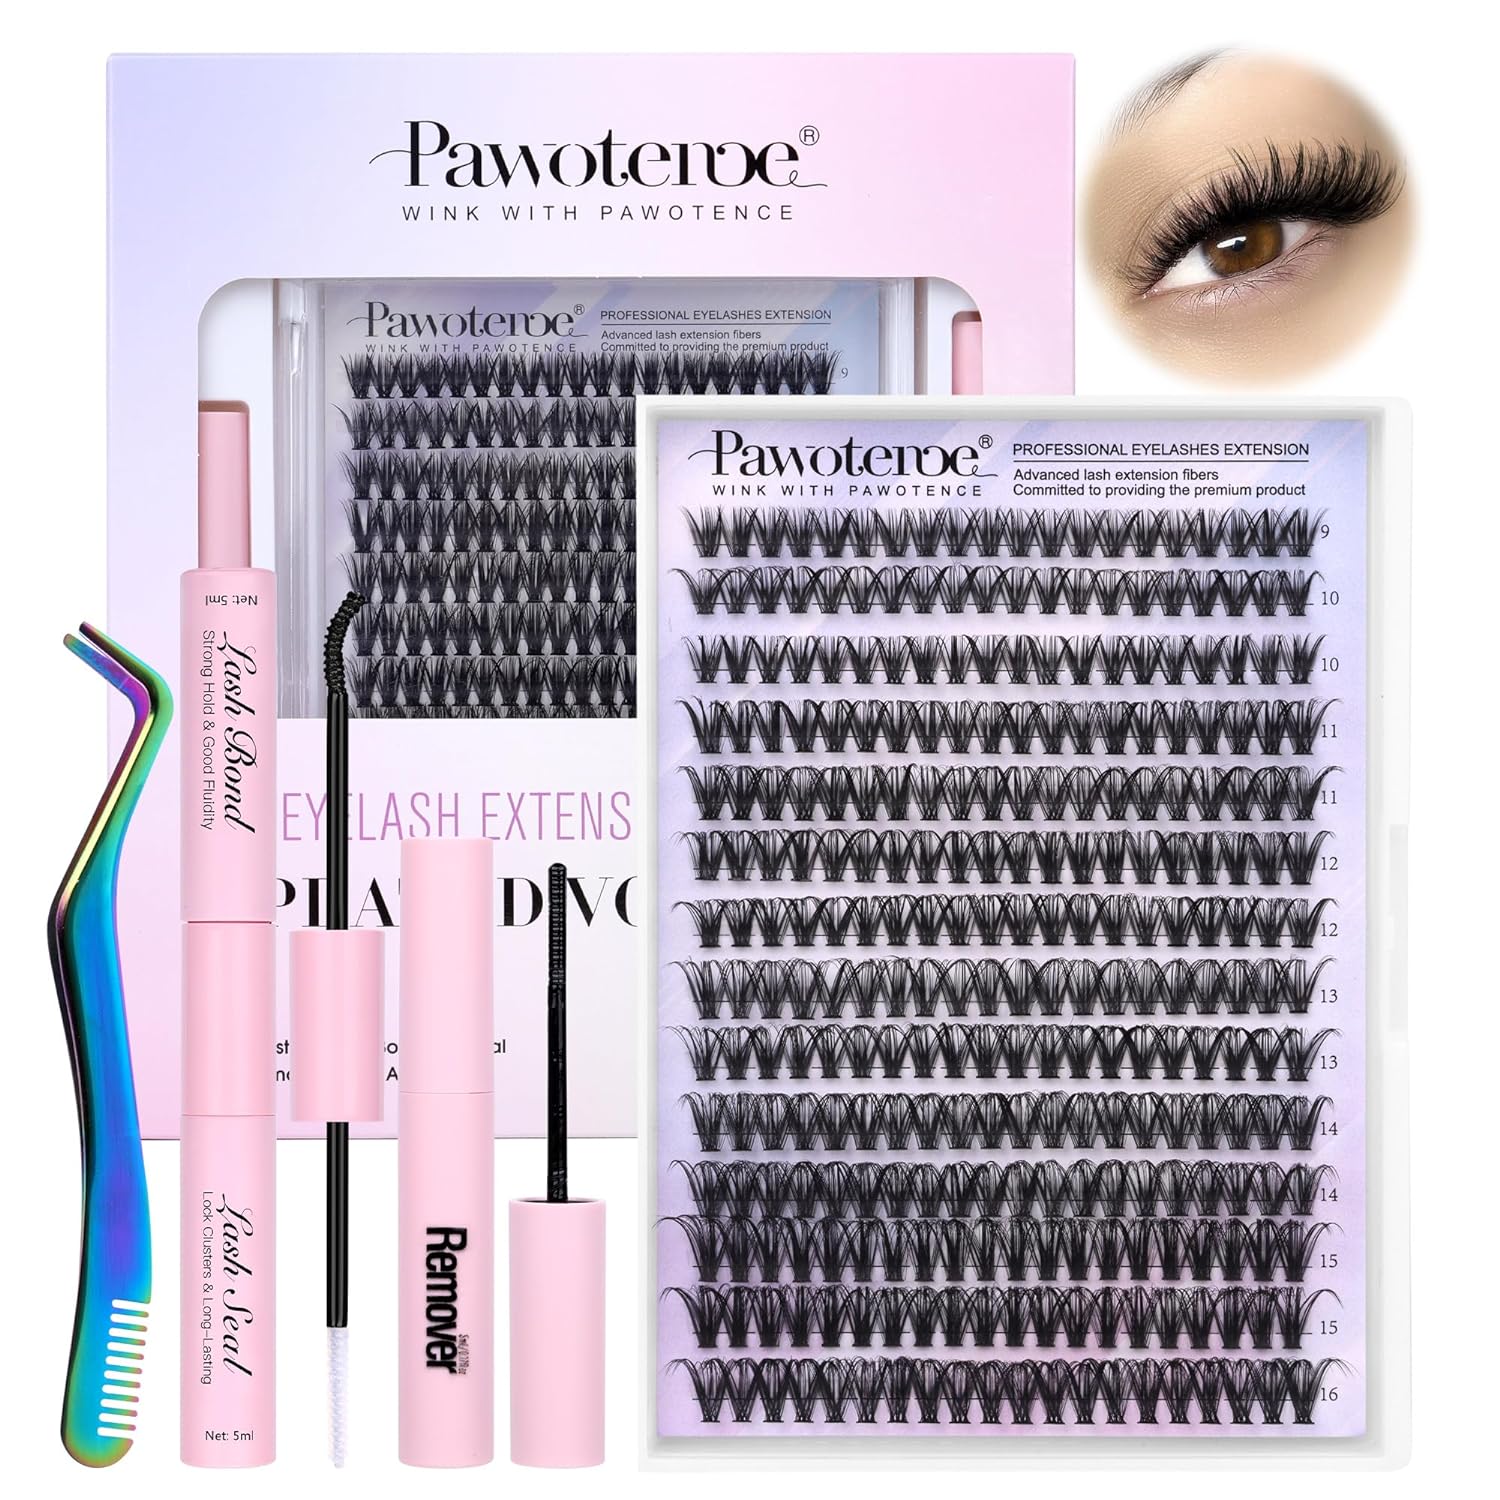 Pawotence DIY Lash Extension Kit 280pcs Individual Lash Clusters 40D Curl Eyelash Extension Kit with Lash Bond and Seal and Remover and Lash Tweezers for Self Application at Home (40D-9-16MIX-ALL KIT)